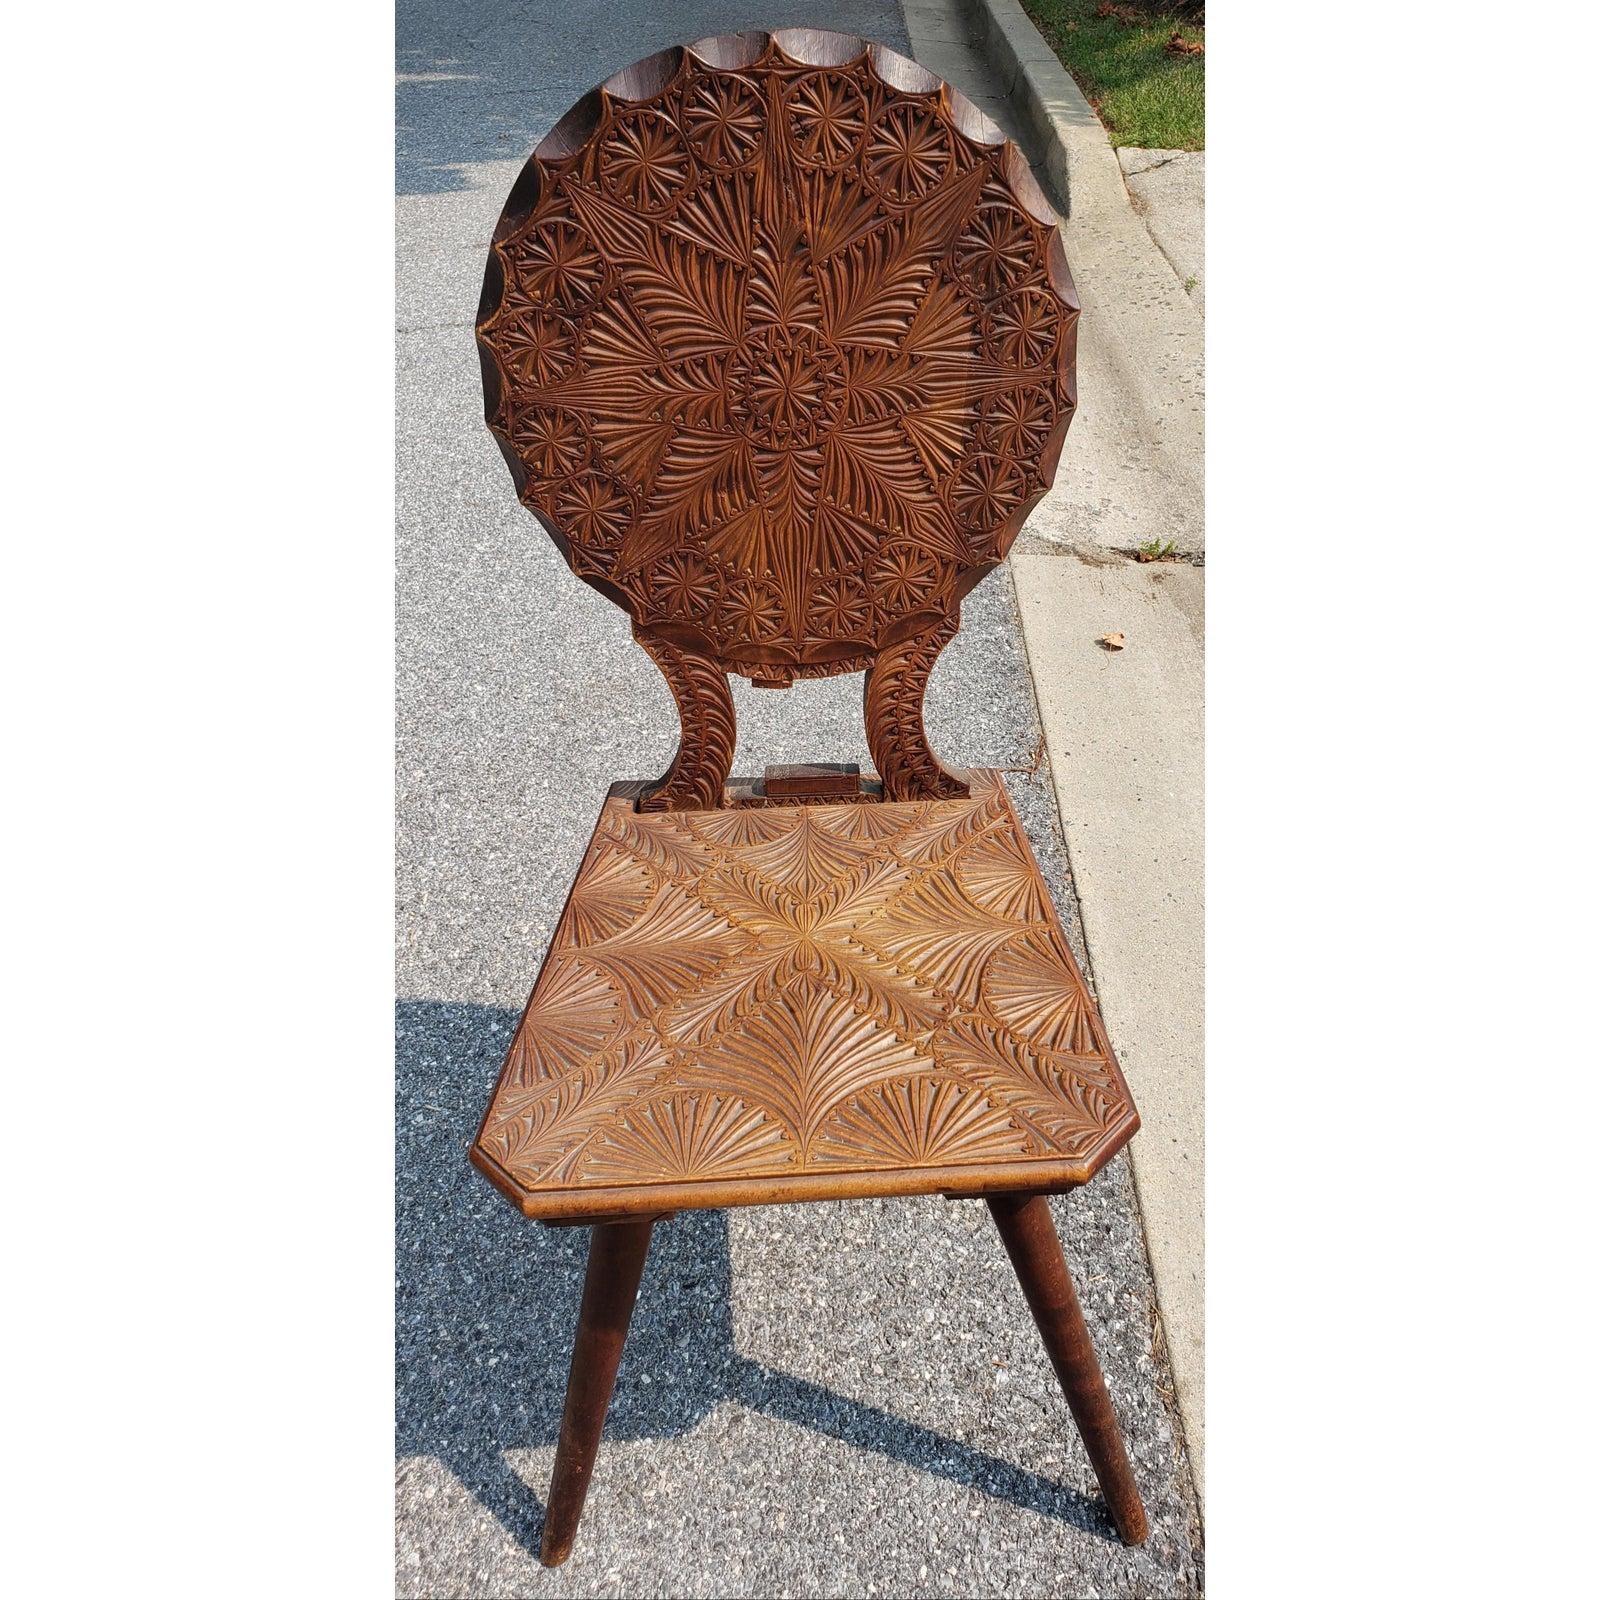 Early 20th Century Antique Carved Wood Chair In Good Condition For Sale In Germantown, MD